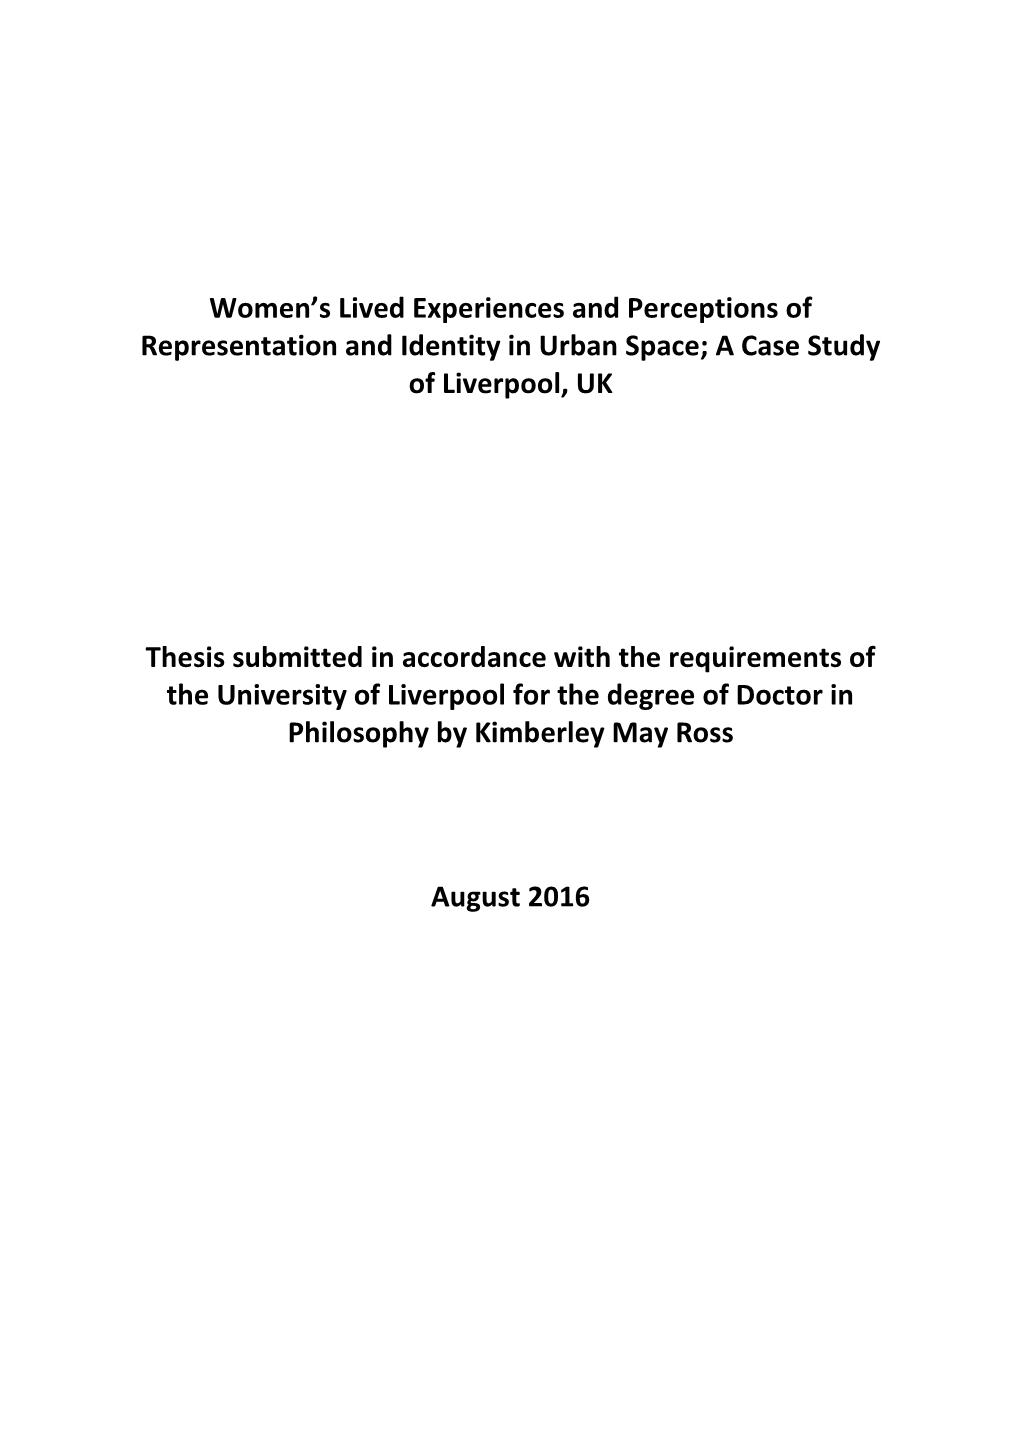 Women's Lived Experiences and Perceptions of Representation And